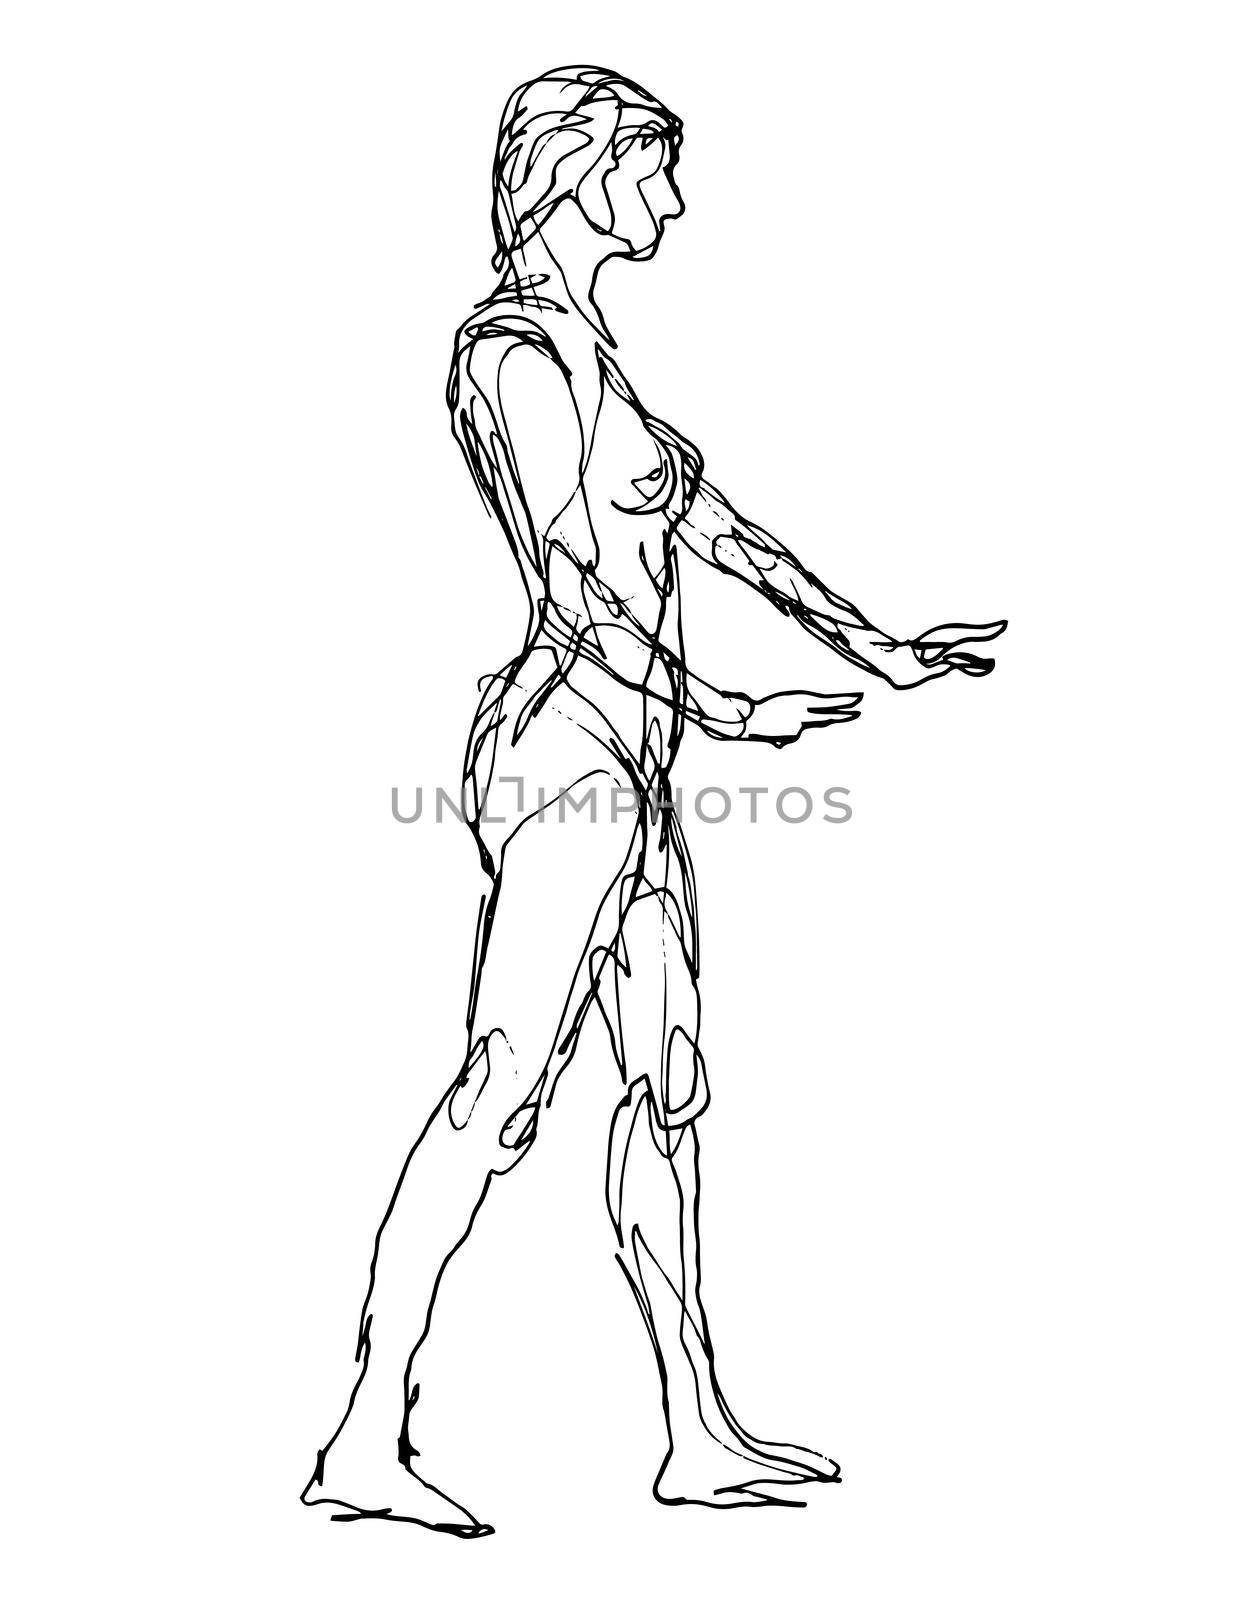 Nude Female Human Figure Posing Standing Side View Doodle Art Continuous Line Drawing  by patrimonio